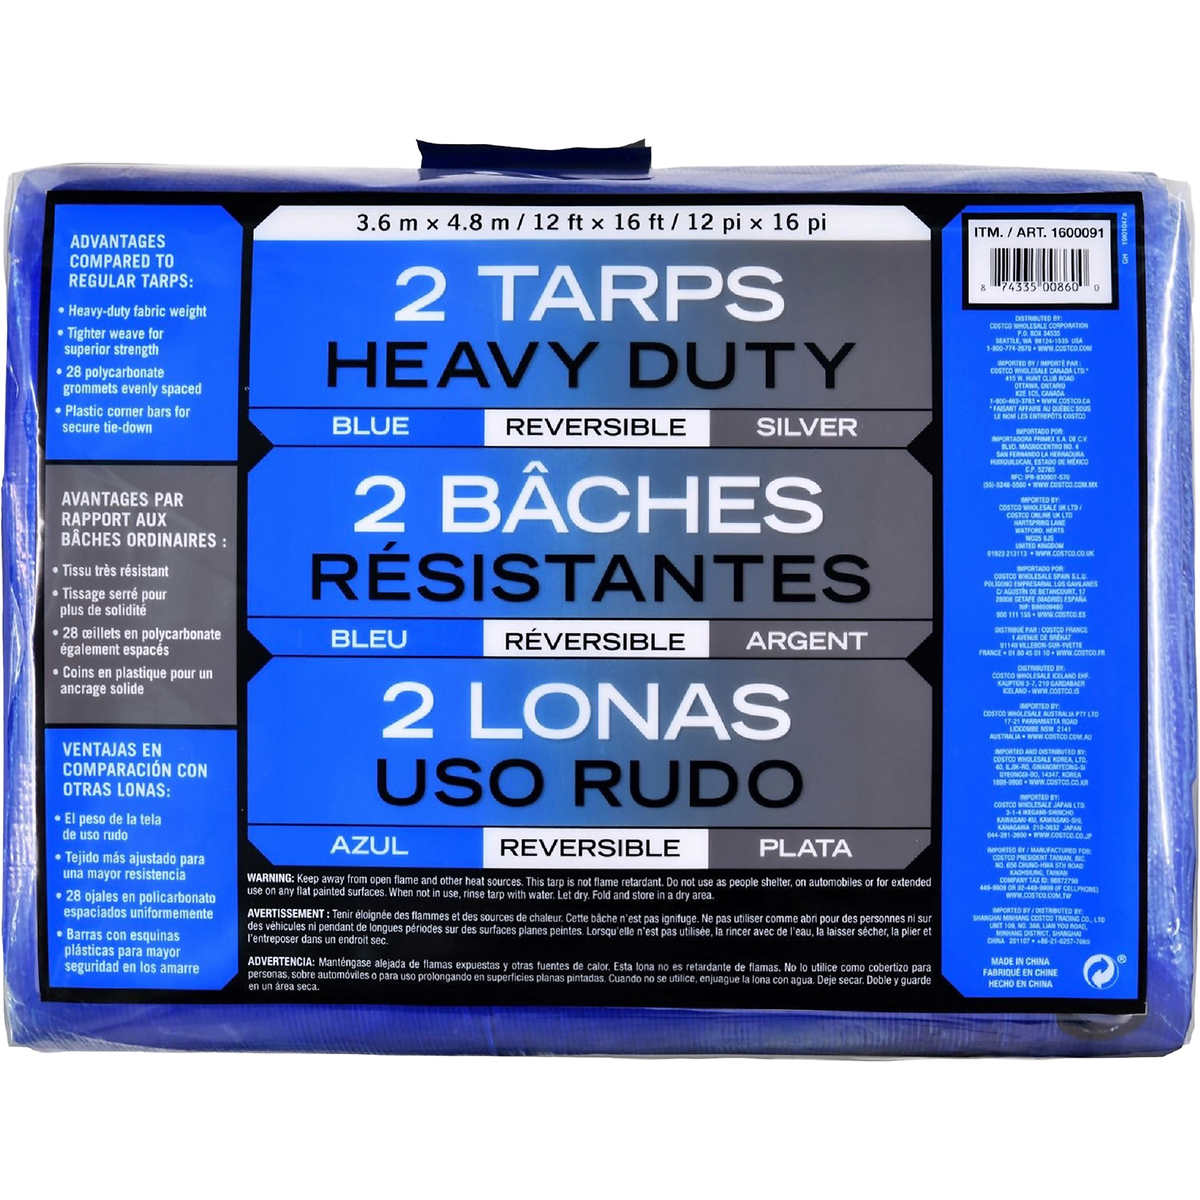 Costco Back In Stock Hd Blue Silver 12 Ft 16 Ft Tarp 2 Pack 29 99 Online And 23 79 In Store Page 3 Redflagdeals Com Forums